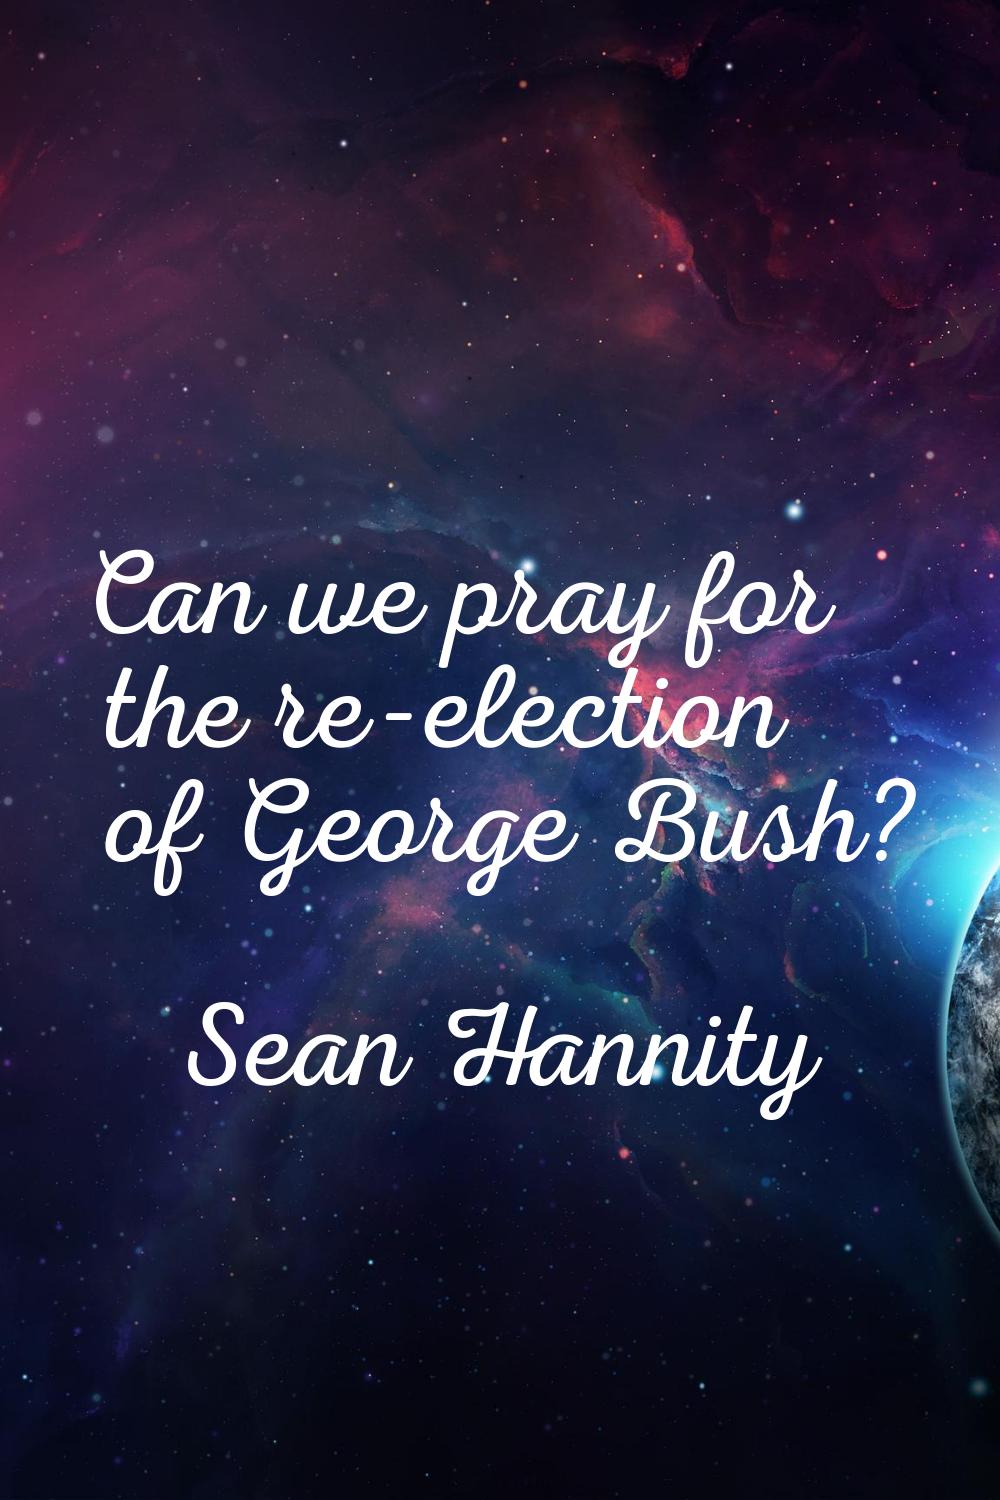 Can we pray for the re-election of George Bush?